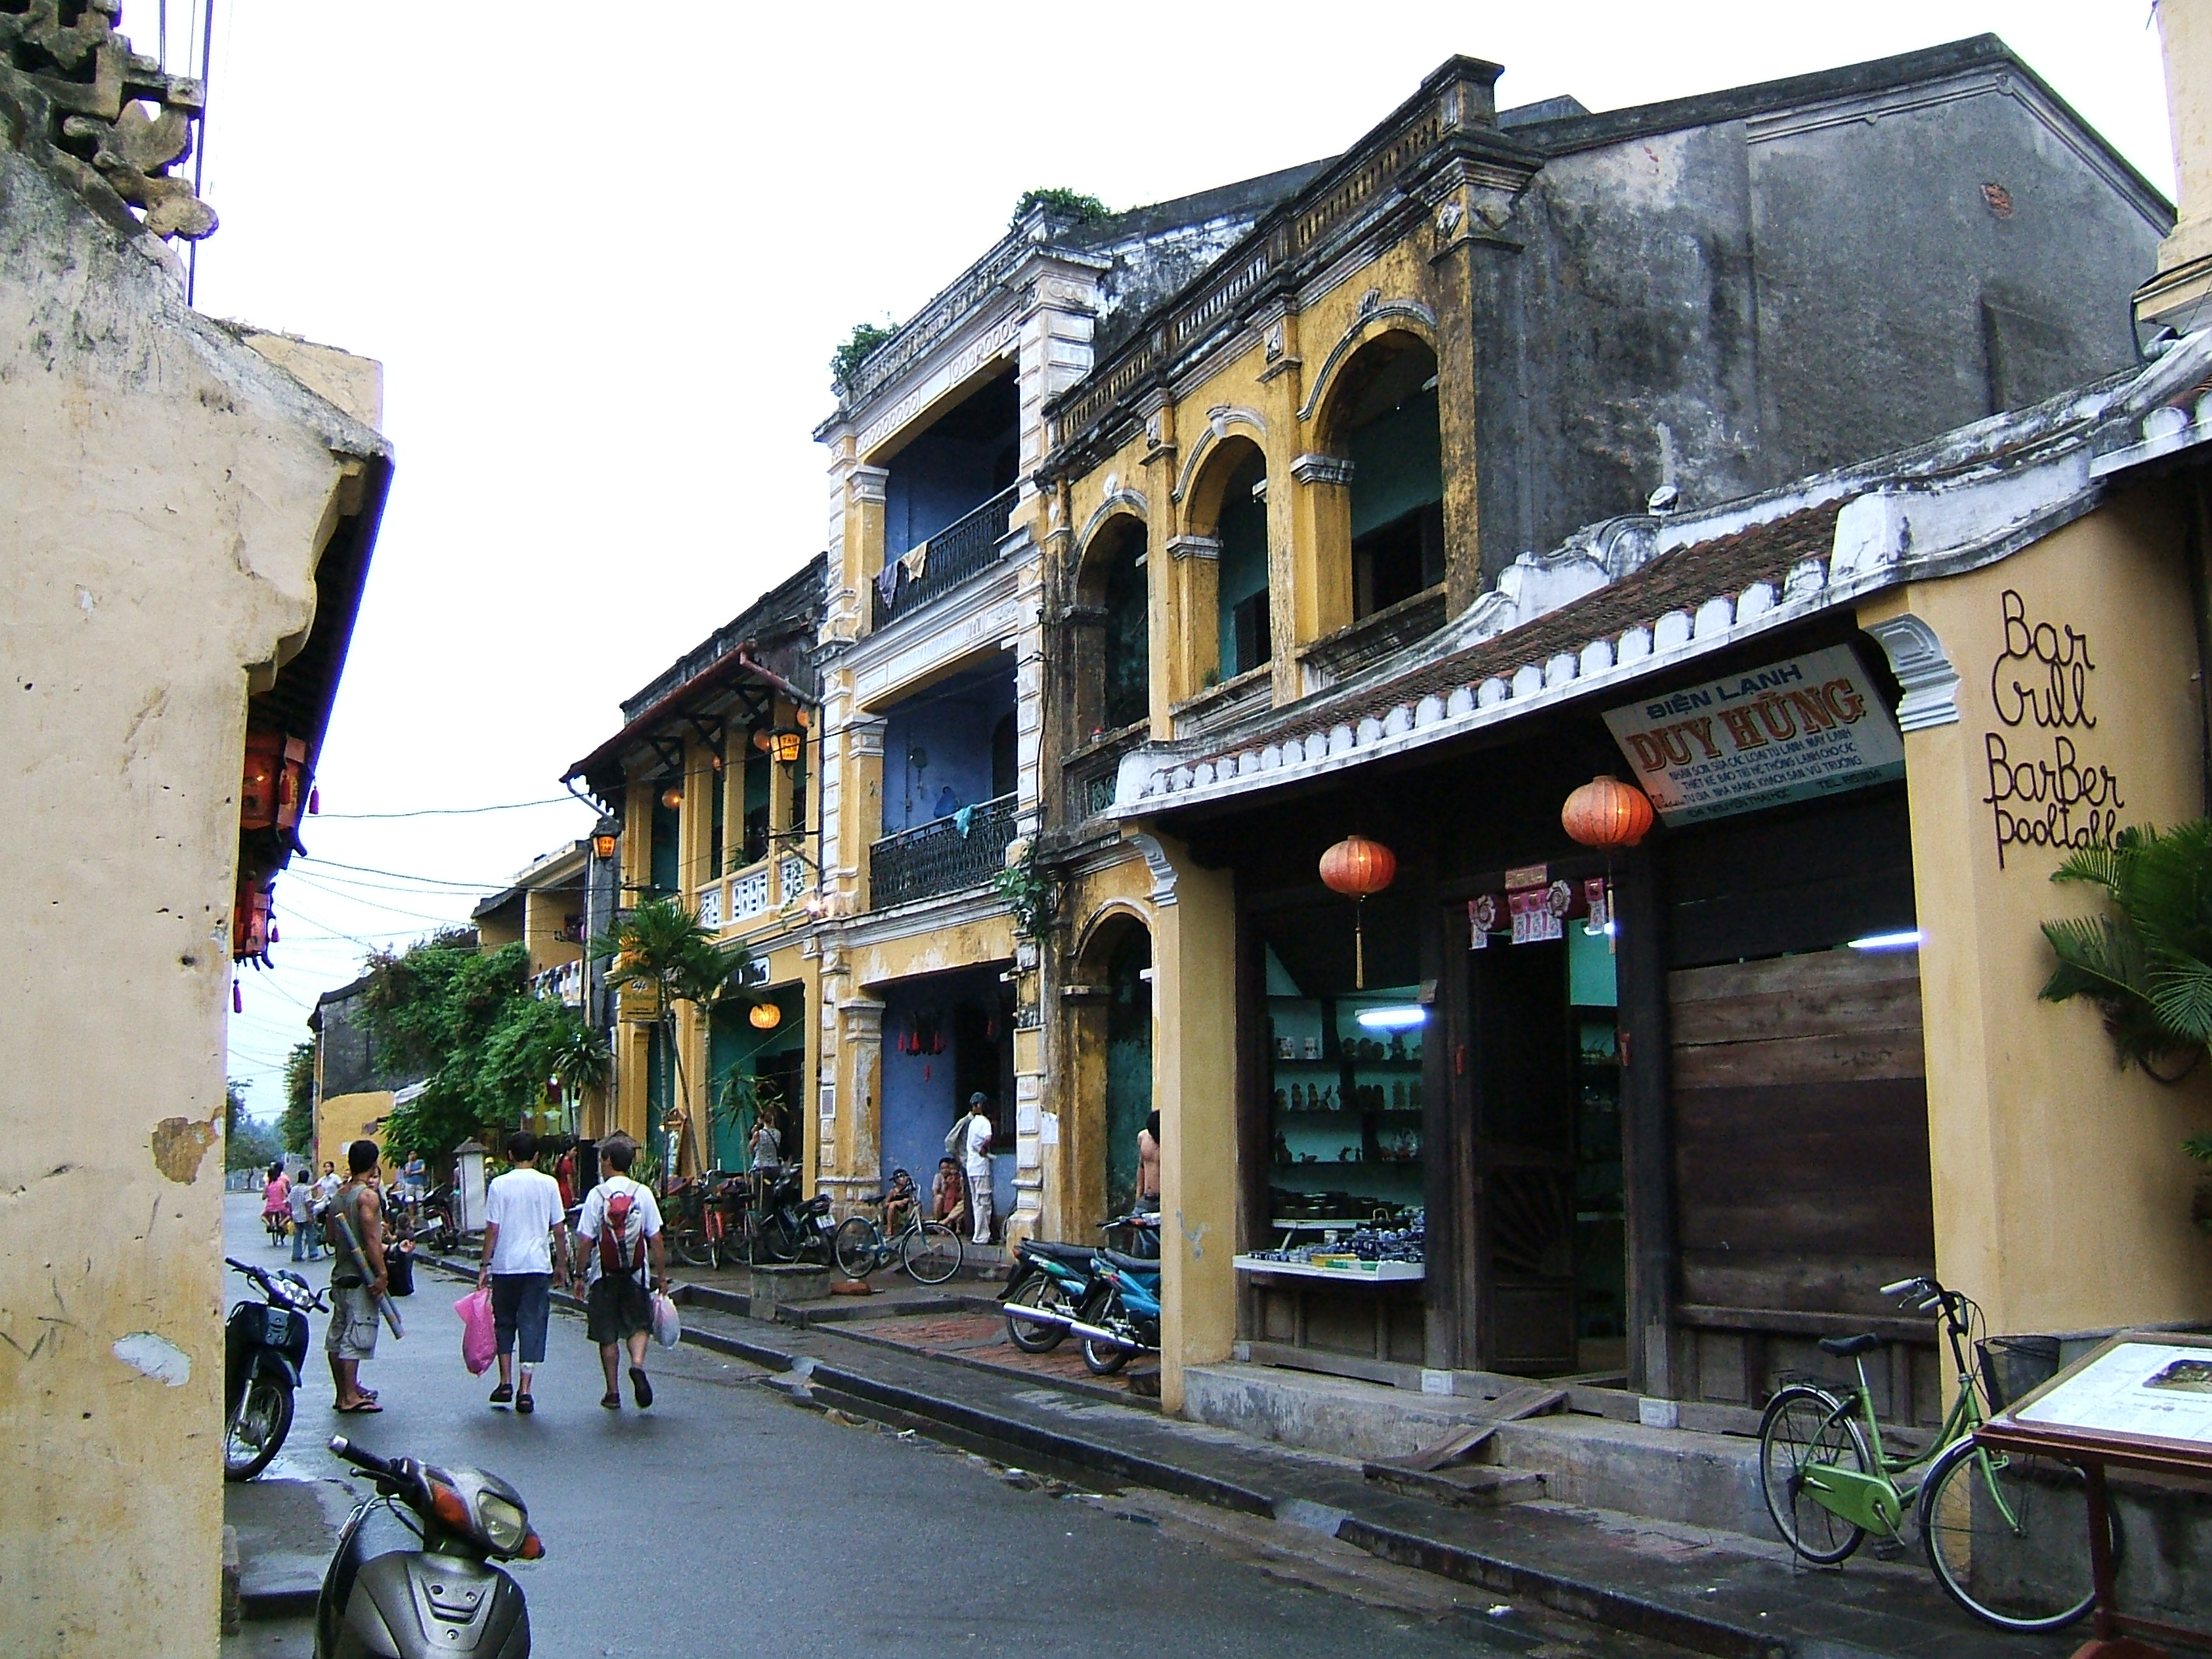 Hoi An increases pedestrianisation